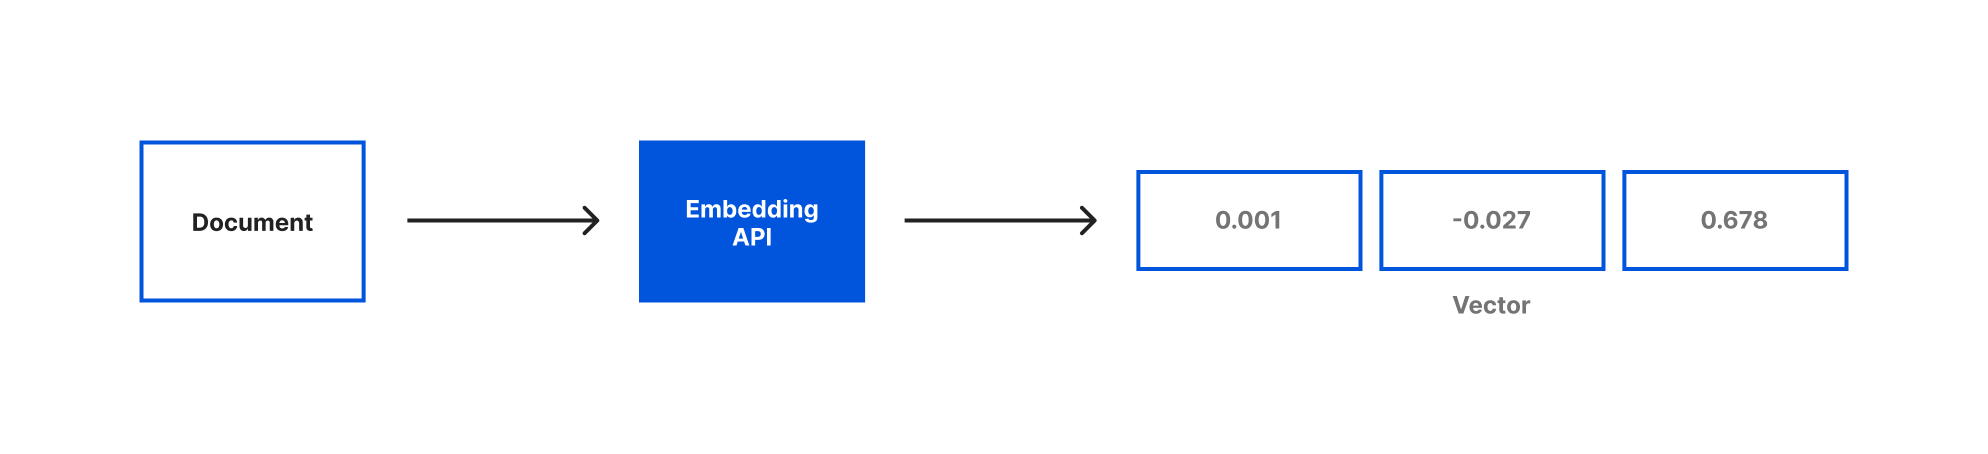 Embeddings - Document on left converted to vector with three dimensions on right by embeddings API